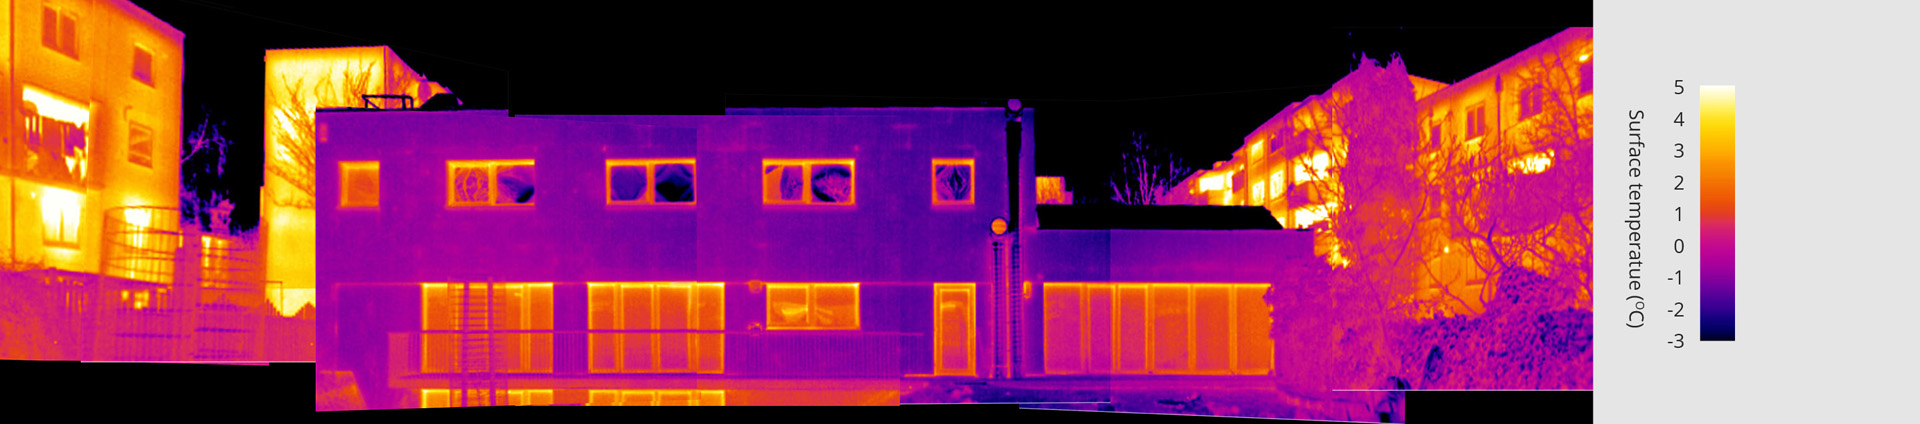 mayville community centre thermal 01